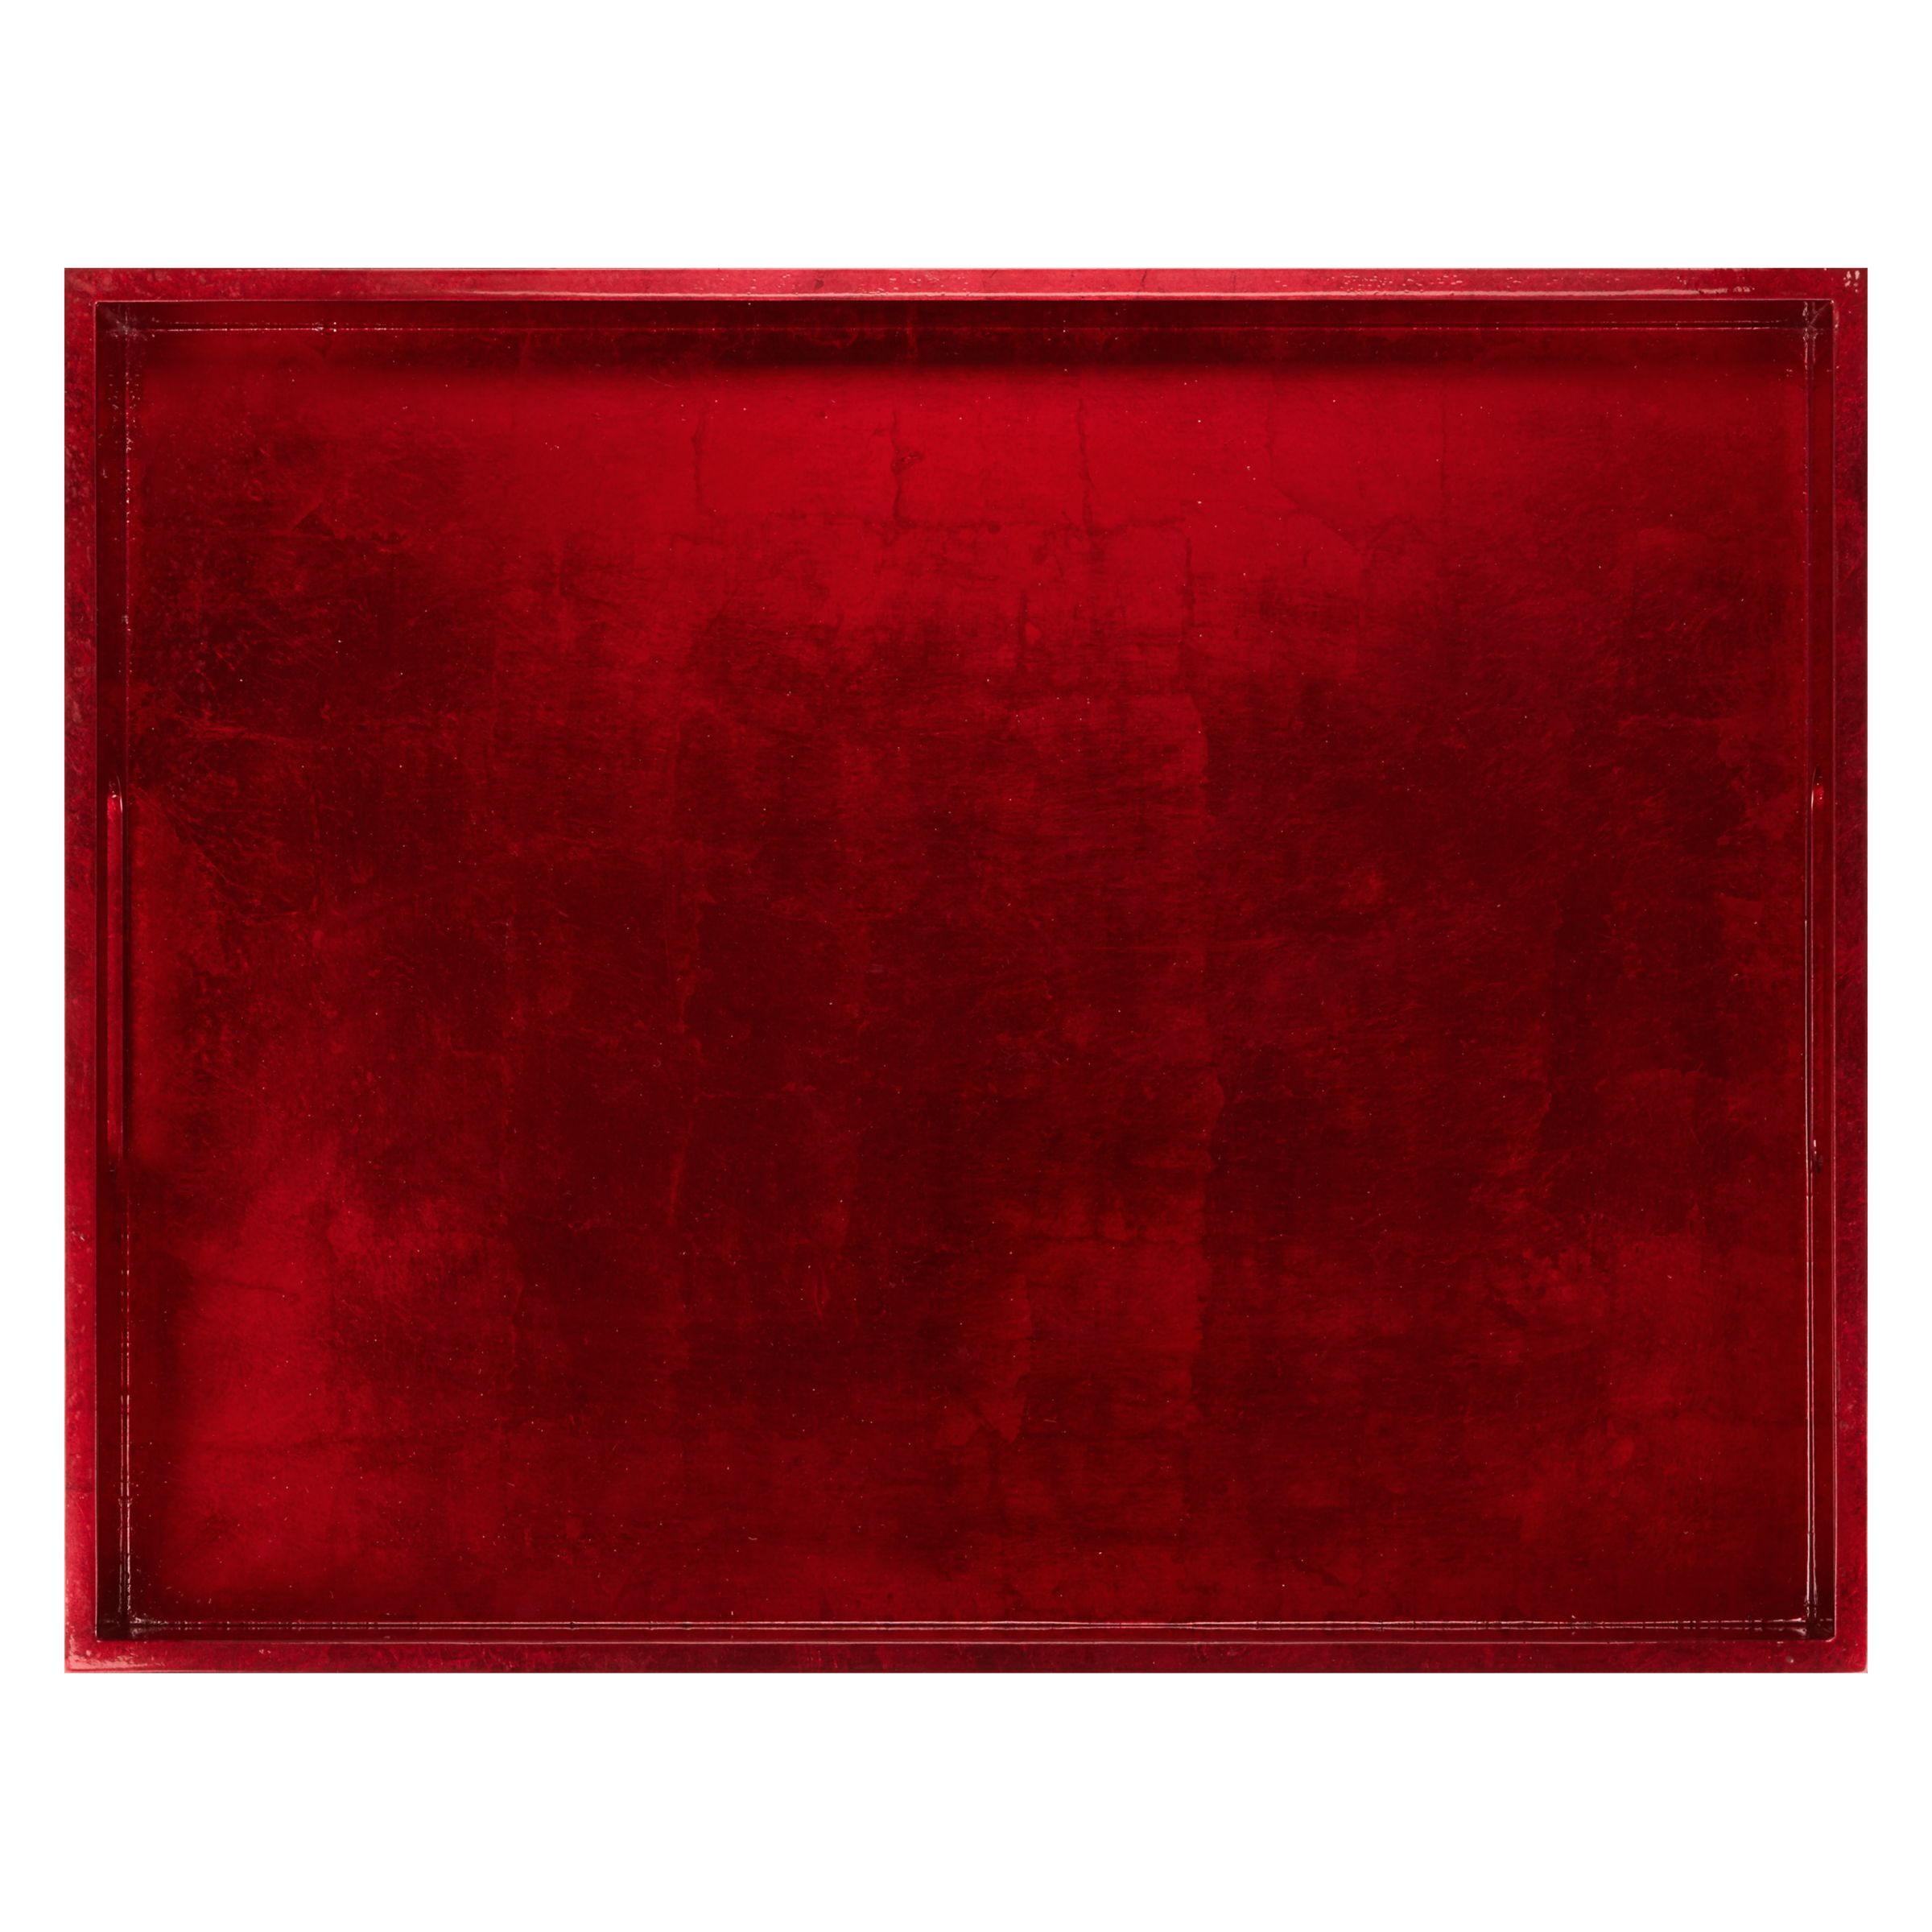 John Lewis & Partners Rectangular Lacquer Tray, Red